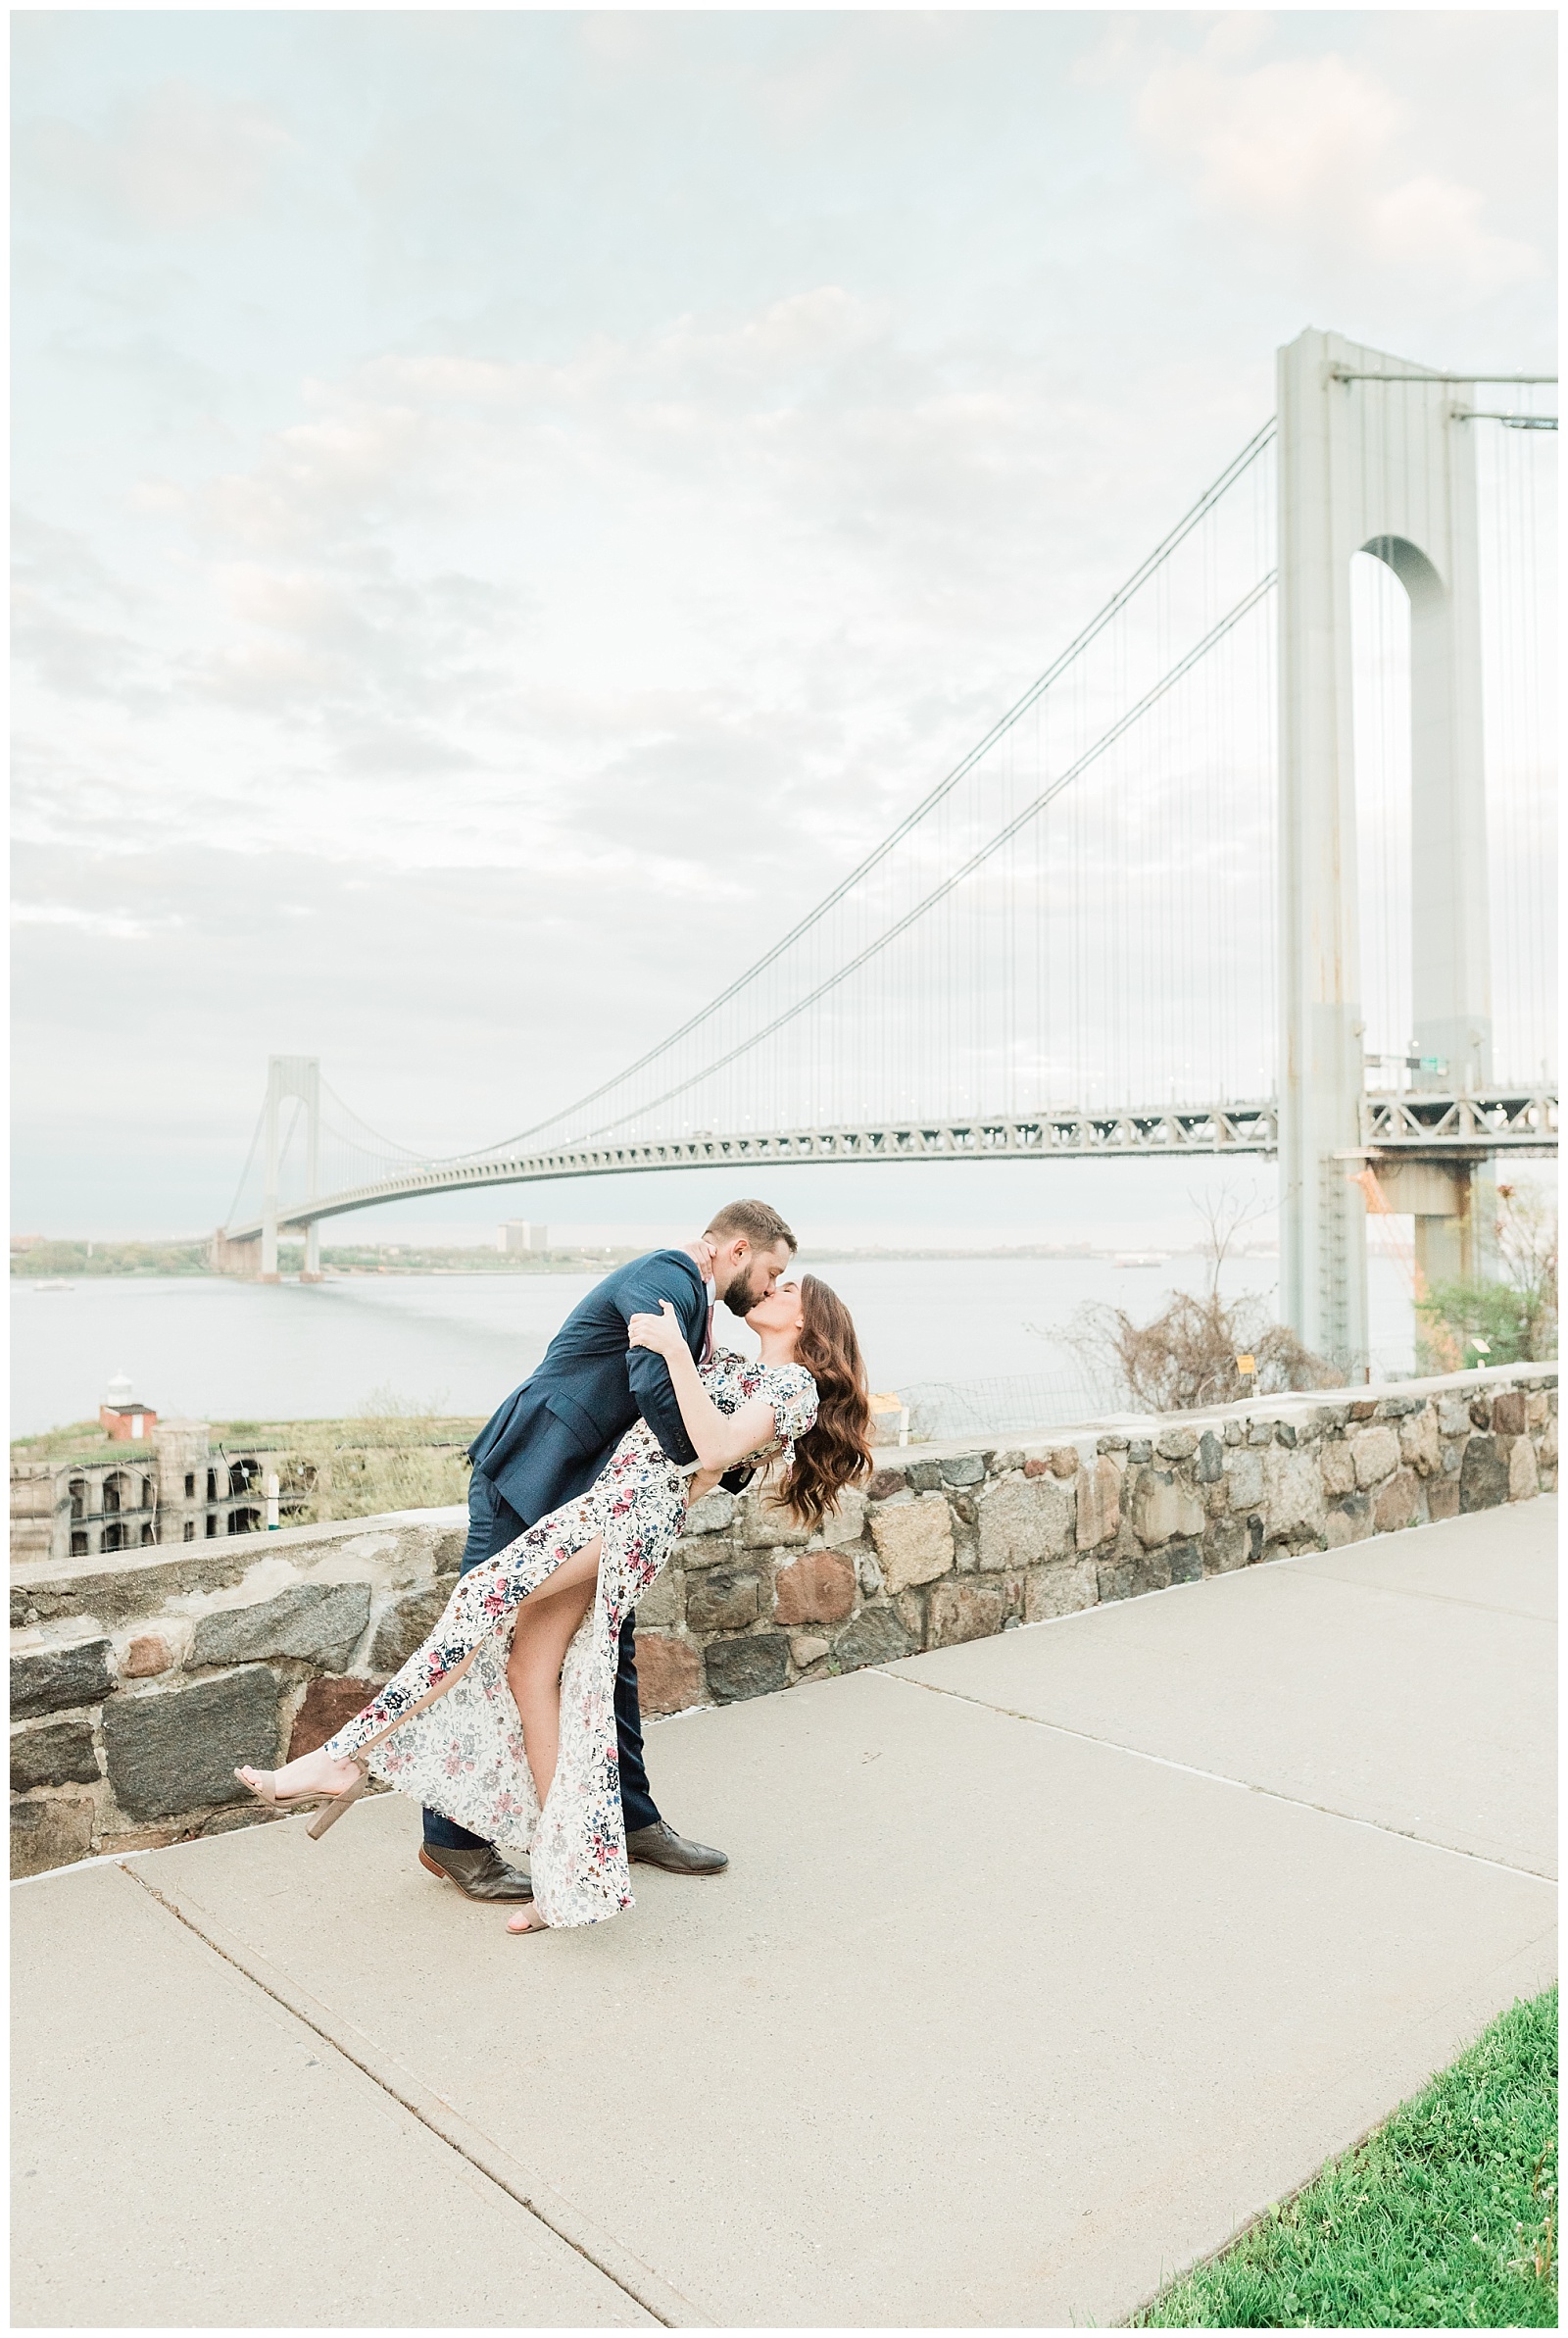 A man dips back his fiancee for a kiss with the Verrazzano Bridge in the background.